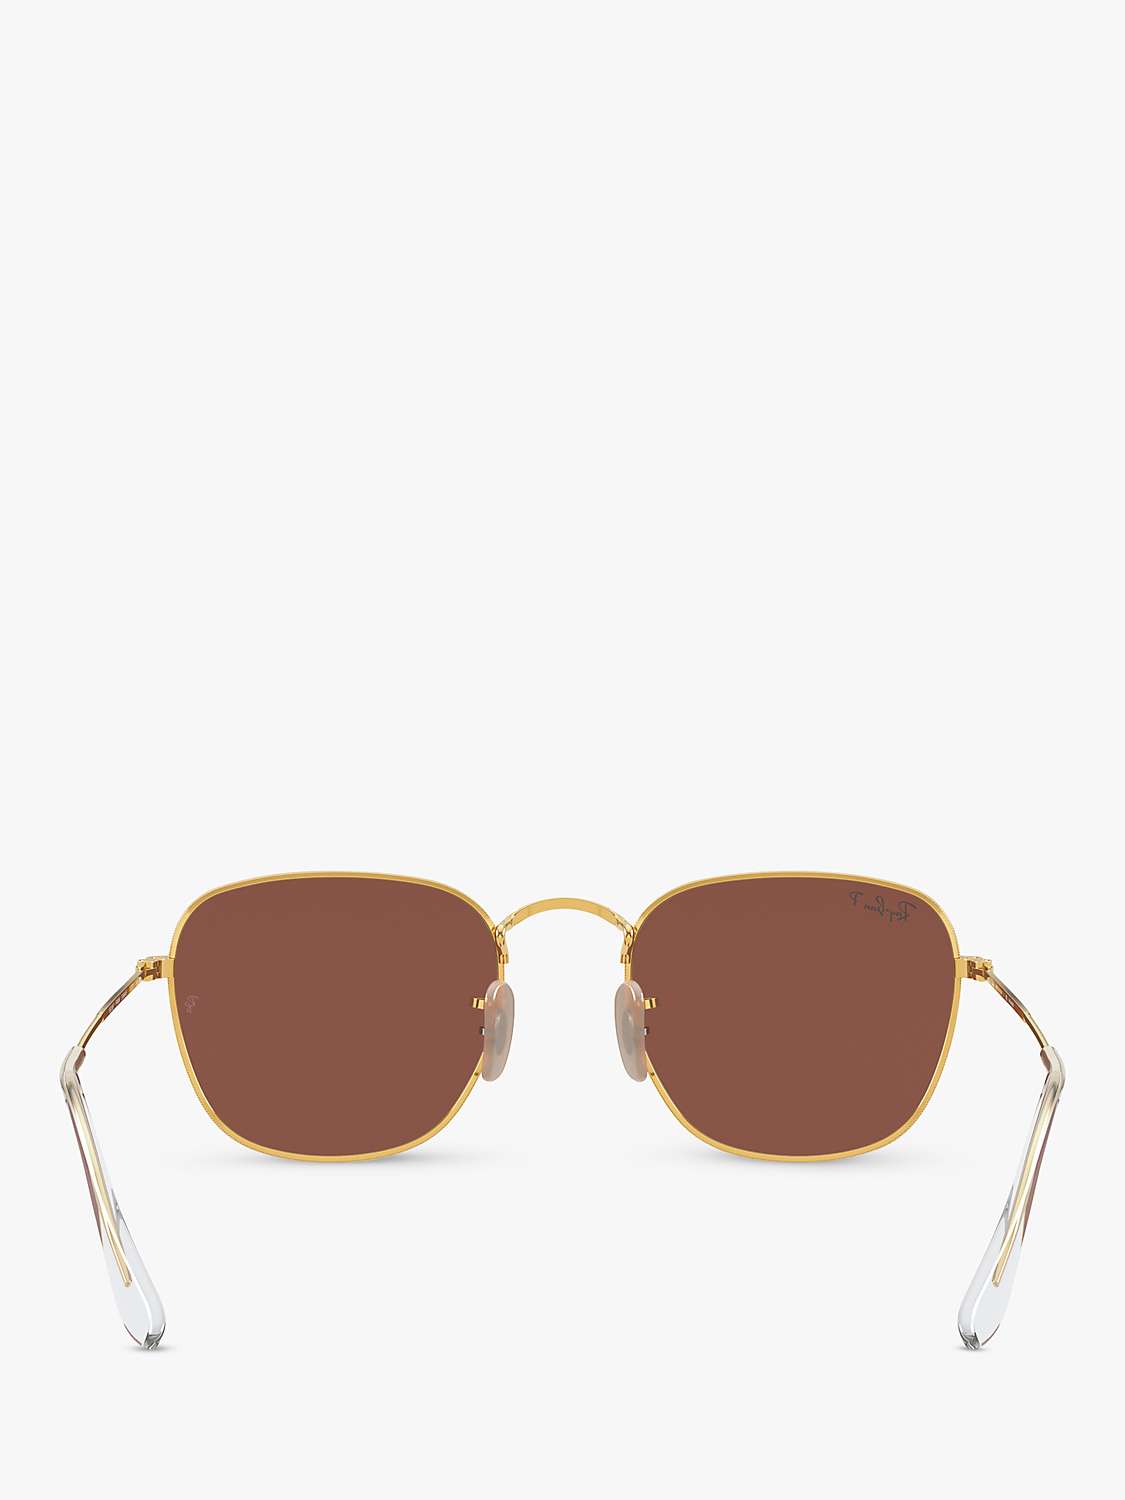 Buy Ray-Ban RB3857 Unisex Square Sunglasses, Gold/Brown Online at johnlewis.com